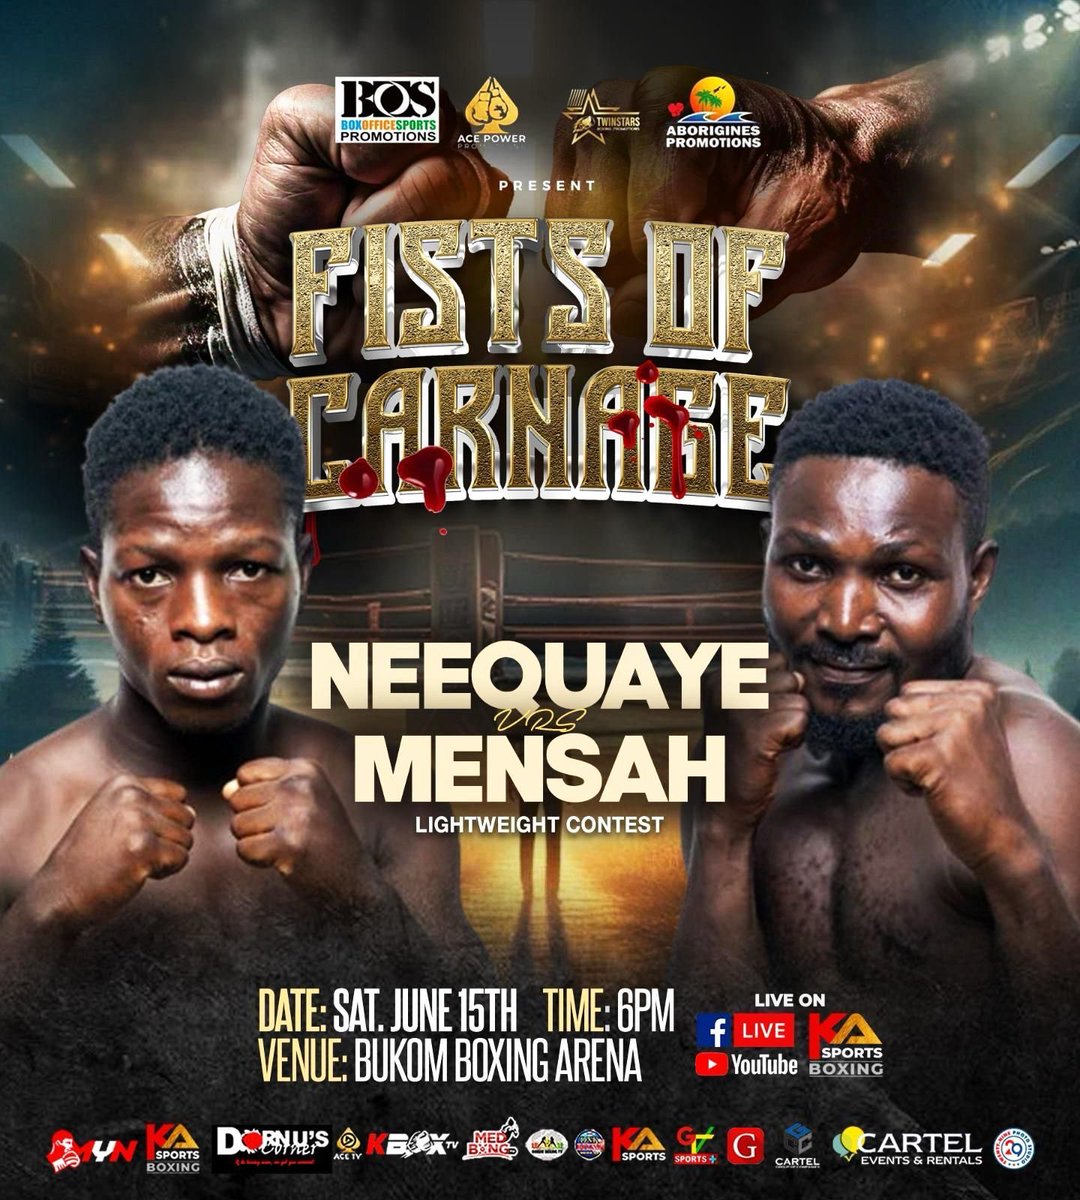 Our teenage sensation Africanus Neequaye aims to go 7-0 on Saturday June 15th in Accra, Ghana at the Bukom Boxing Arena!!! ⁦@Streetwisemgt⁩ 🇬🇭🔥🇬🇭